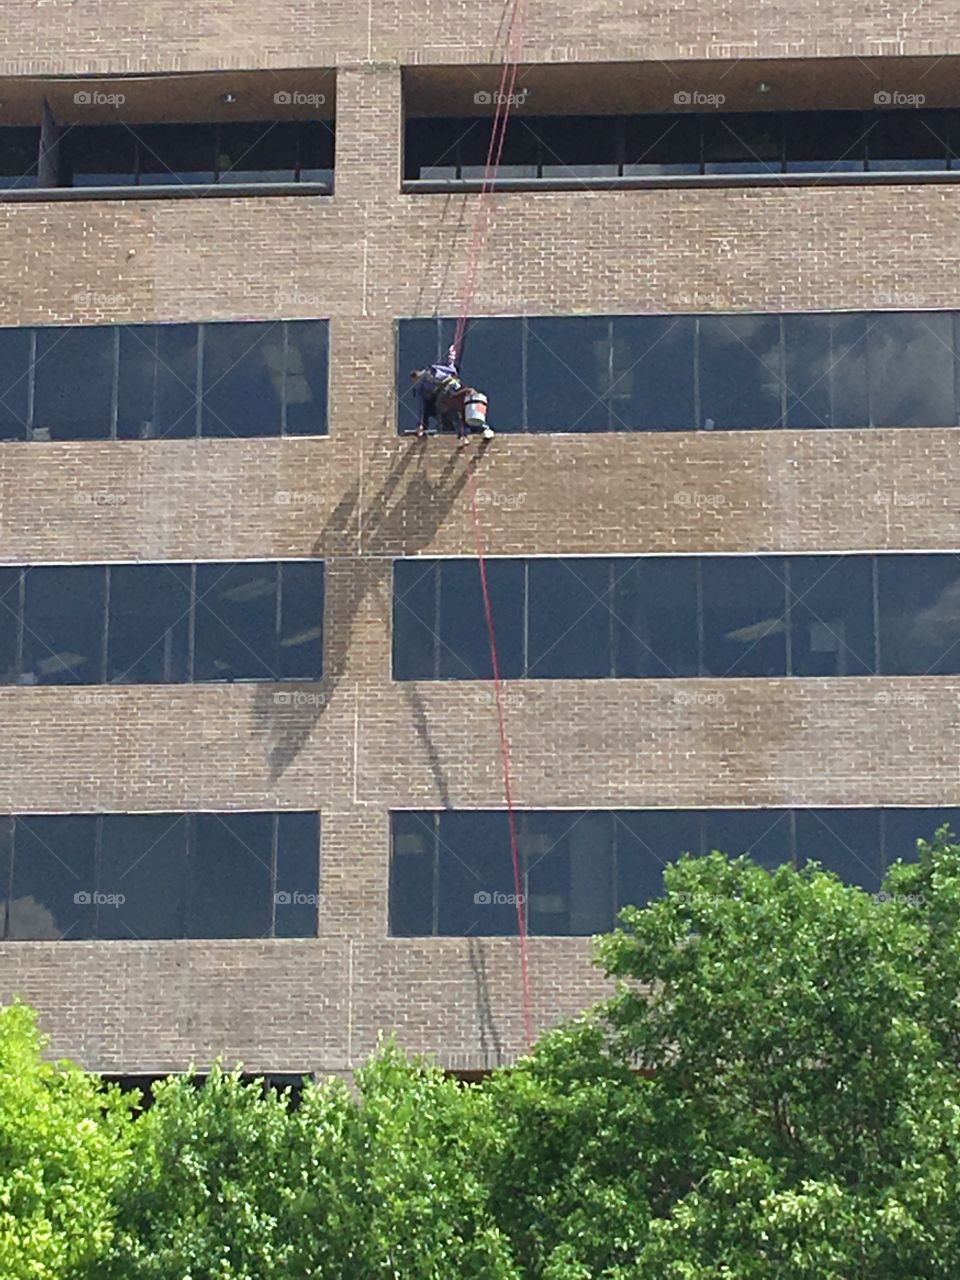 My hats off to anyone who swings from the roof of a building and cleans the windows, especially in 100 degree weather 